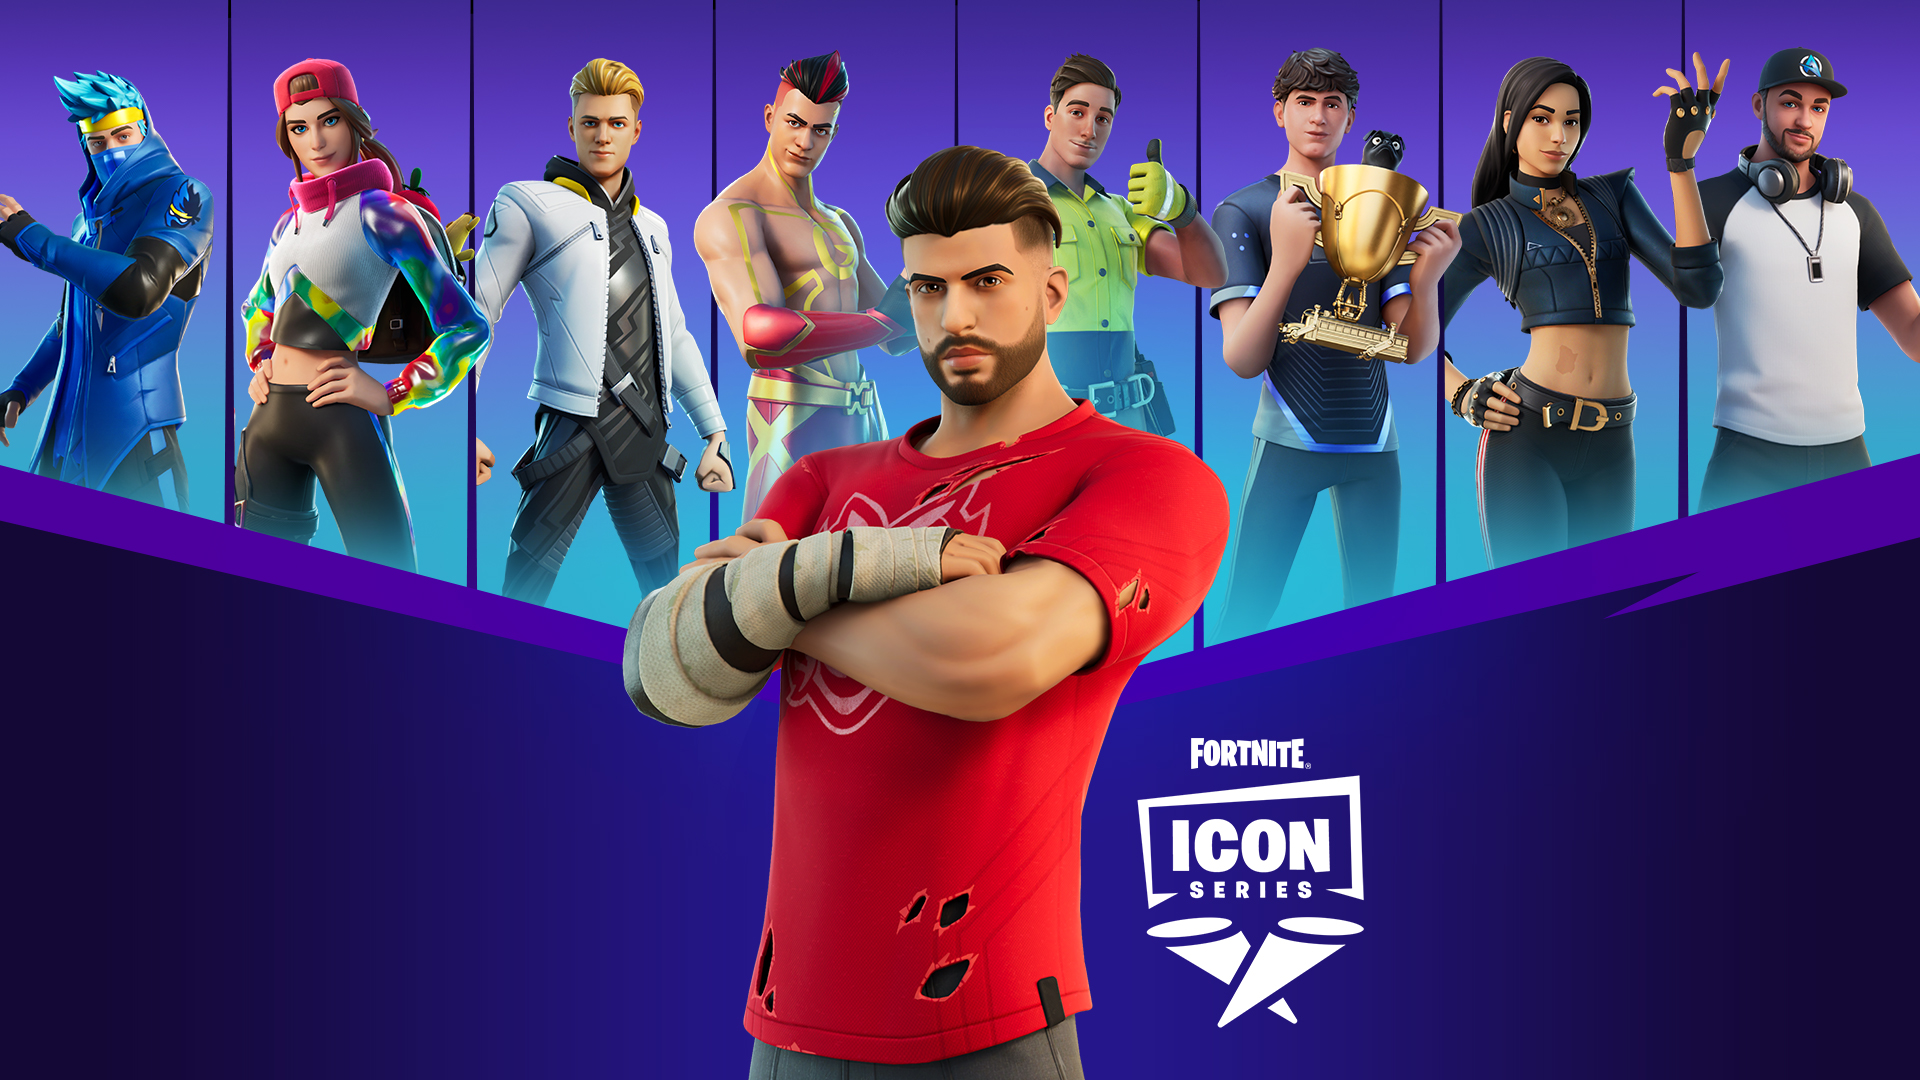 Fortnite on X: Icon Series rite of passage: being added to this